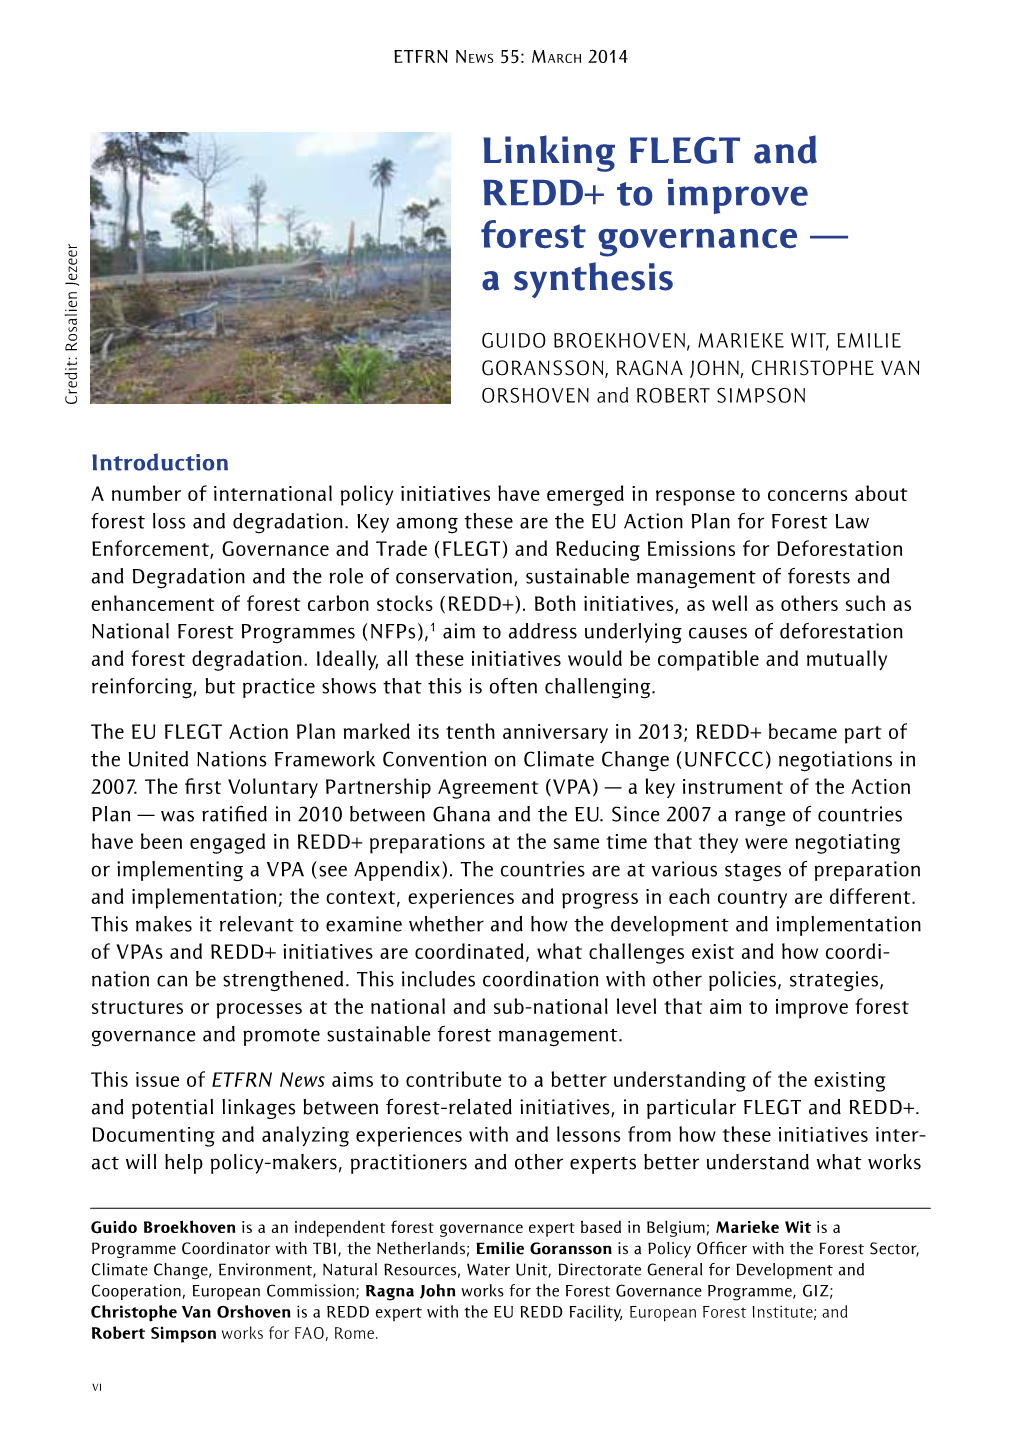 Linking FLEGT and REDD+ to Improve Forest Governance — a Synthesis